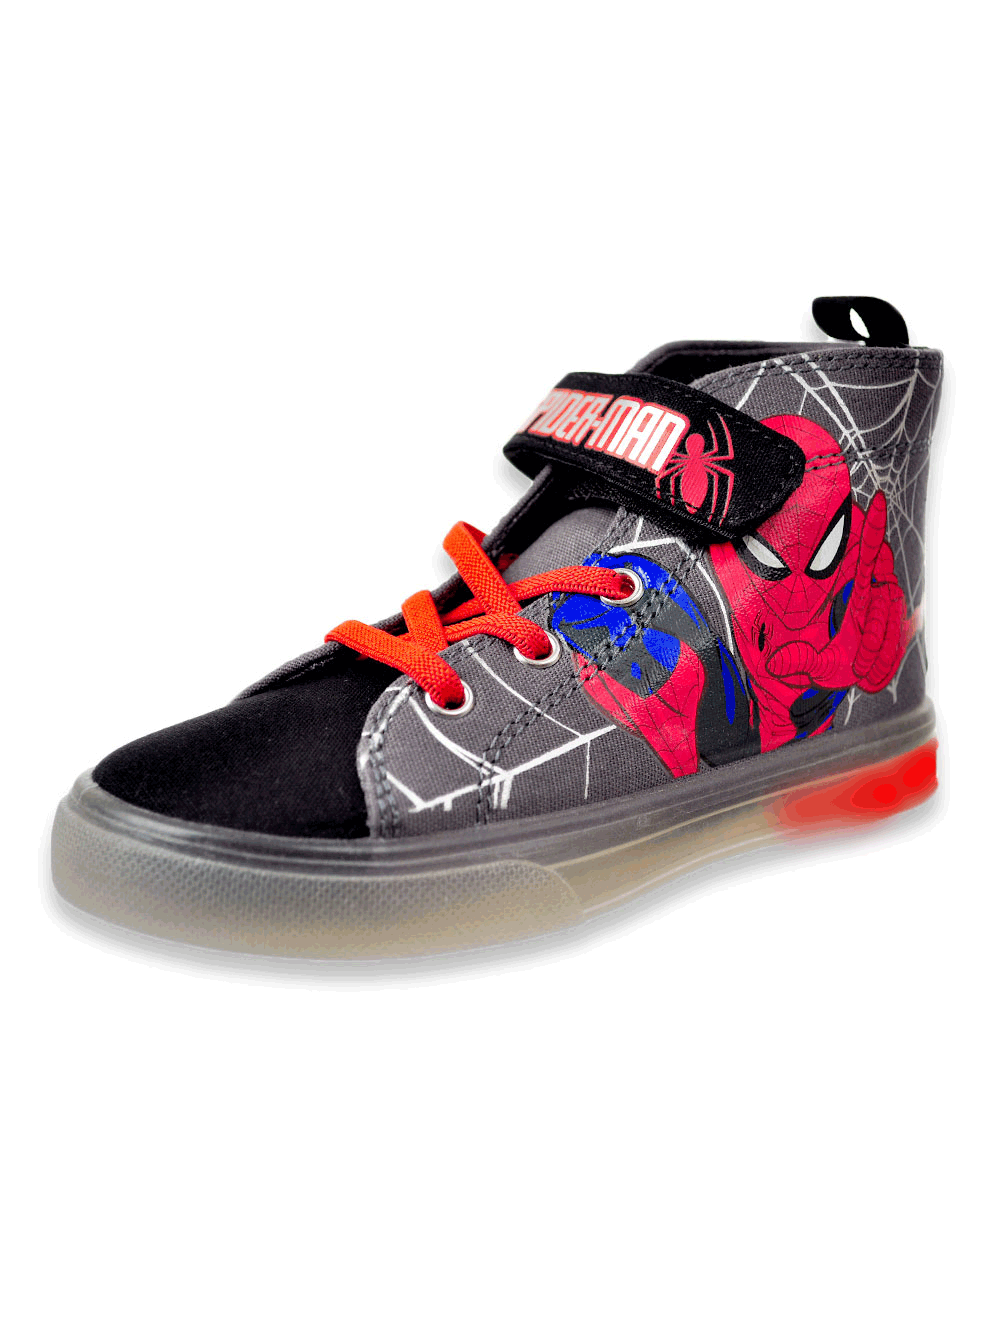 spiderman shoes that light up